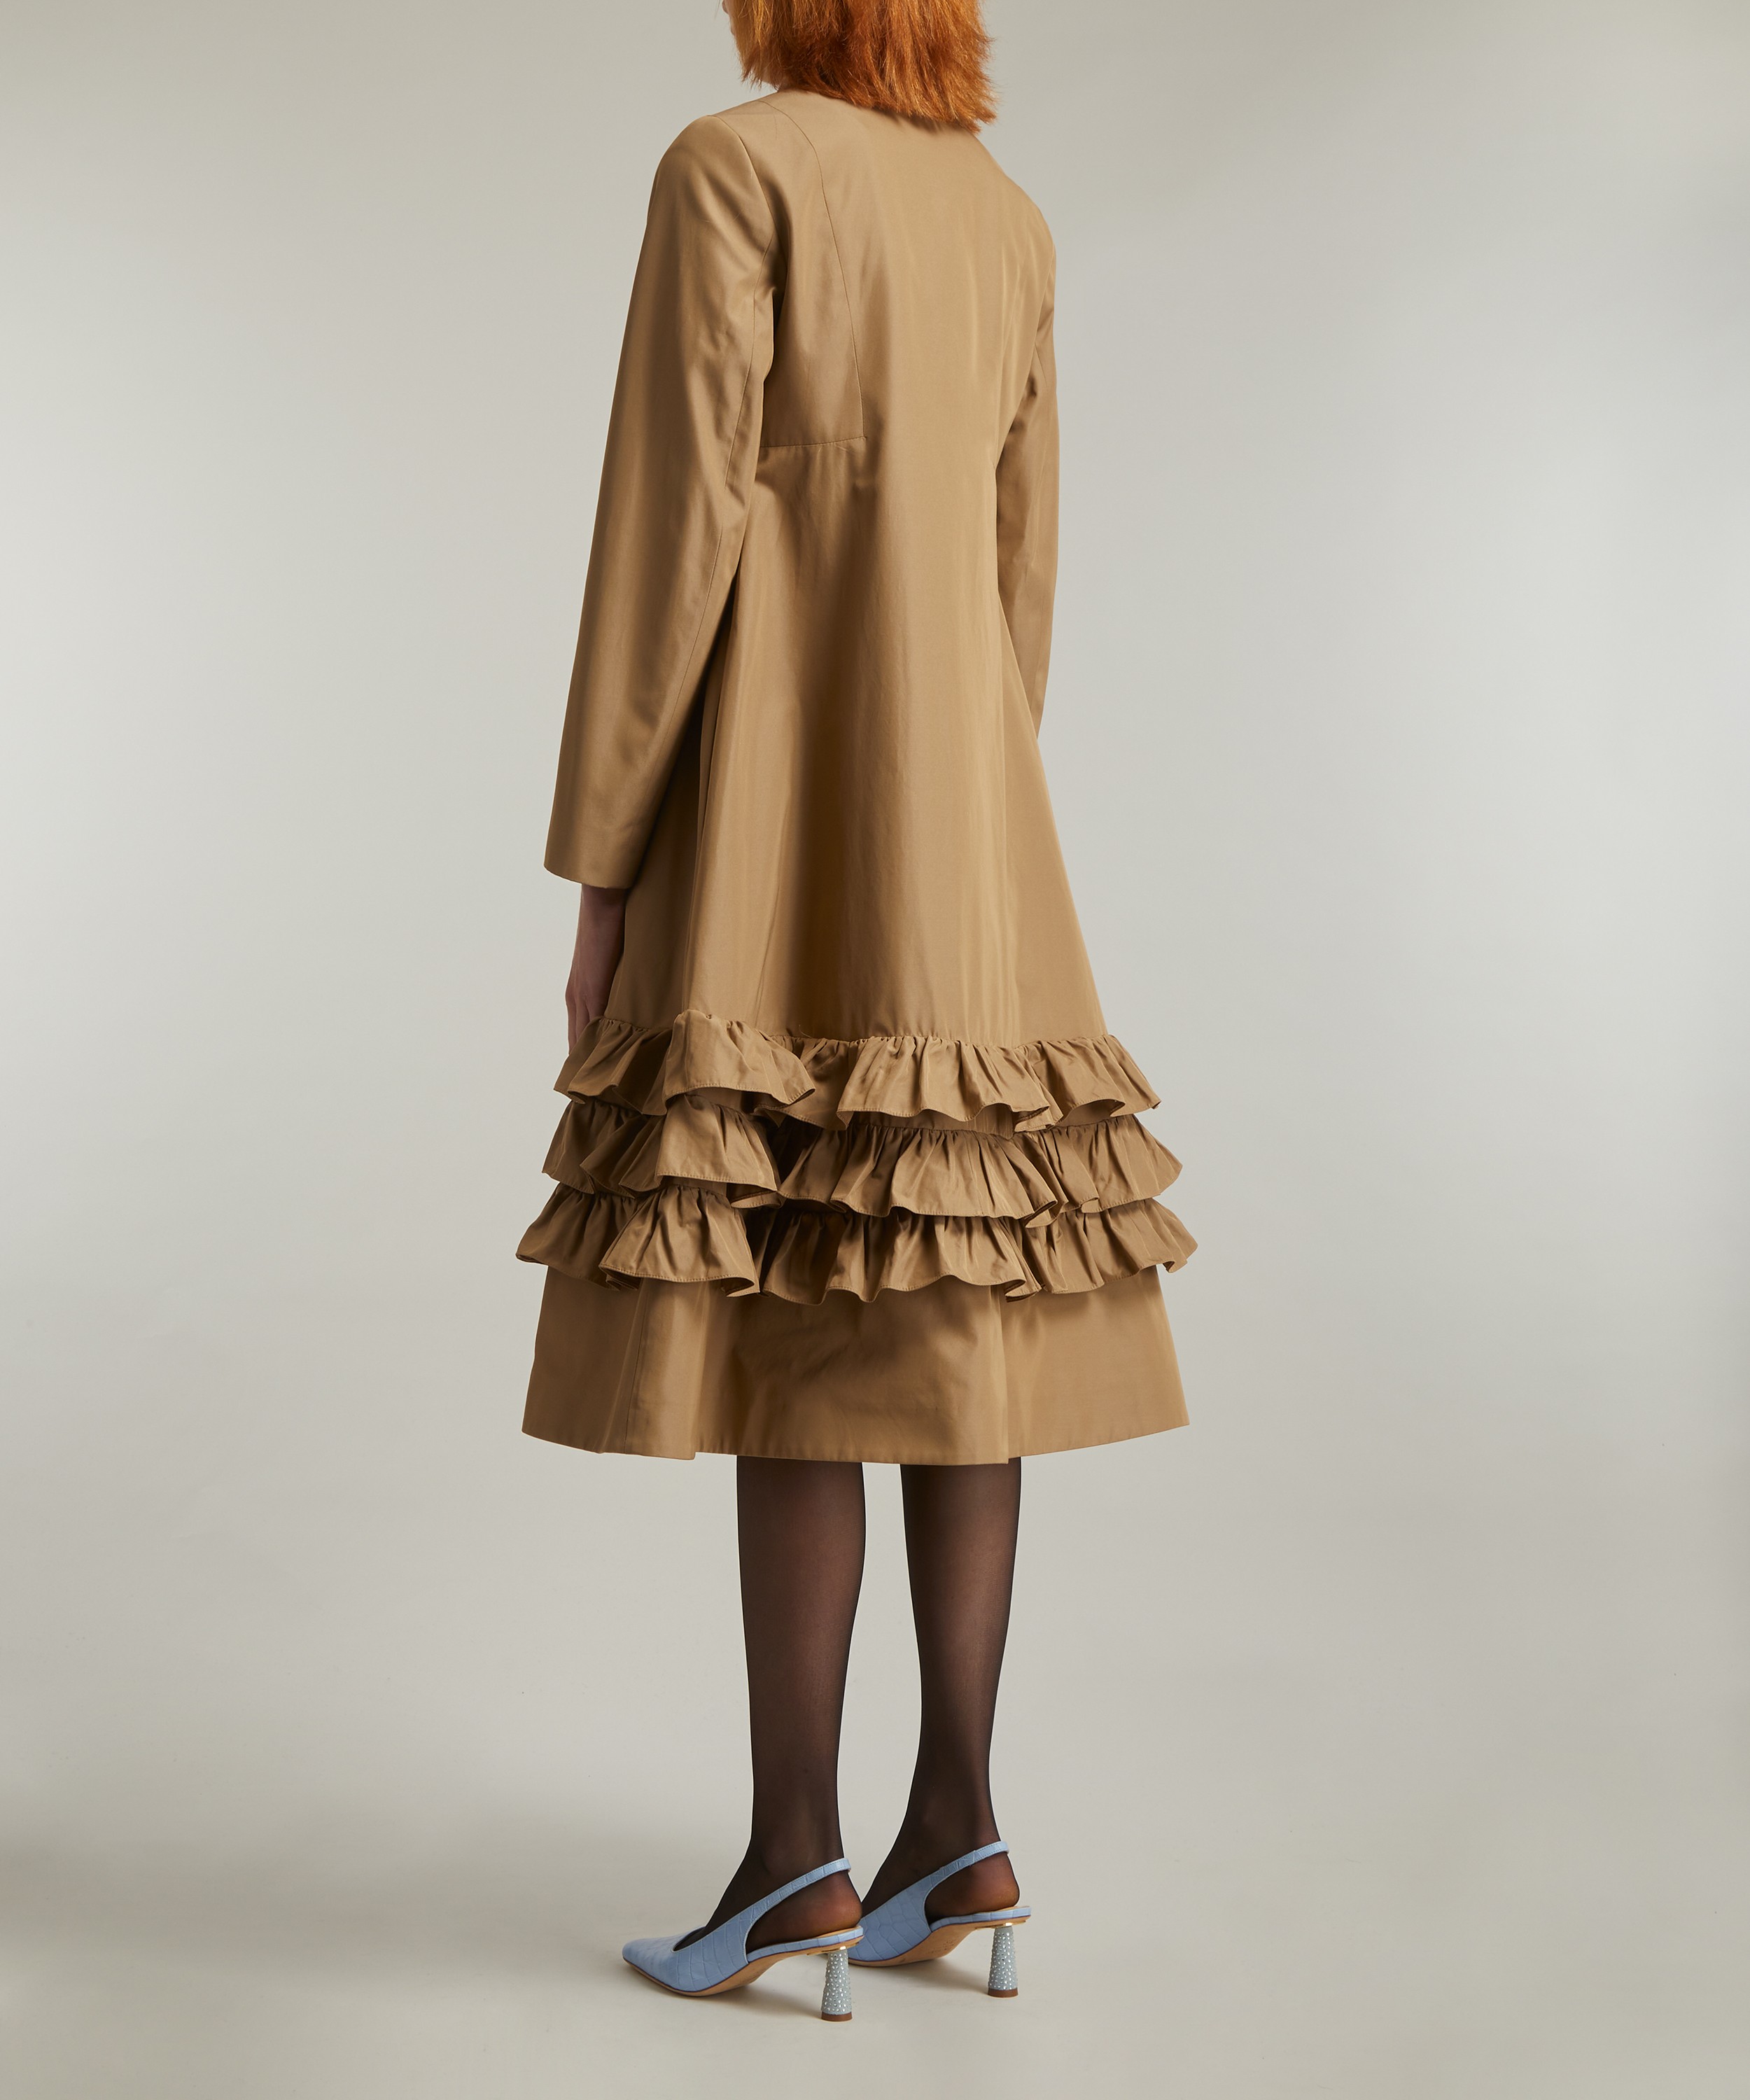 Molly Goddard - Lacey Tan Coat image number 3